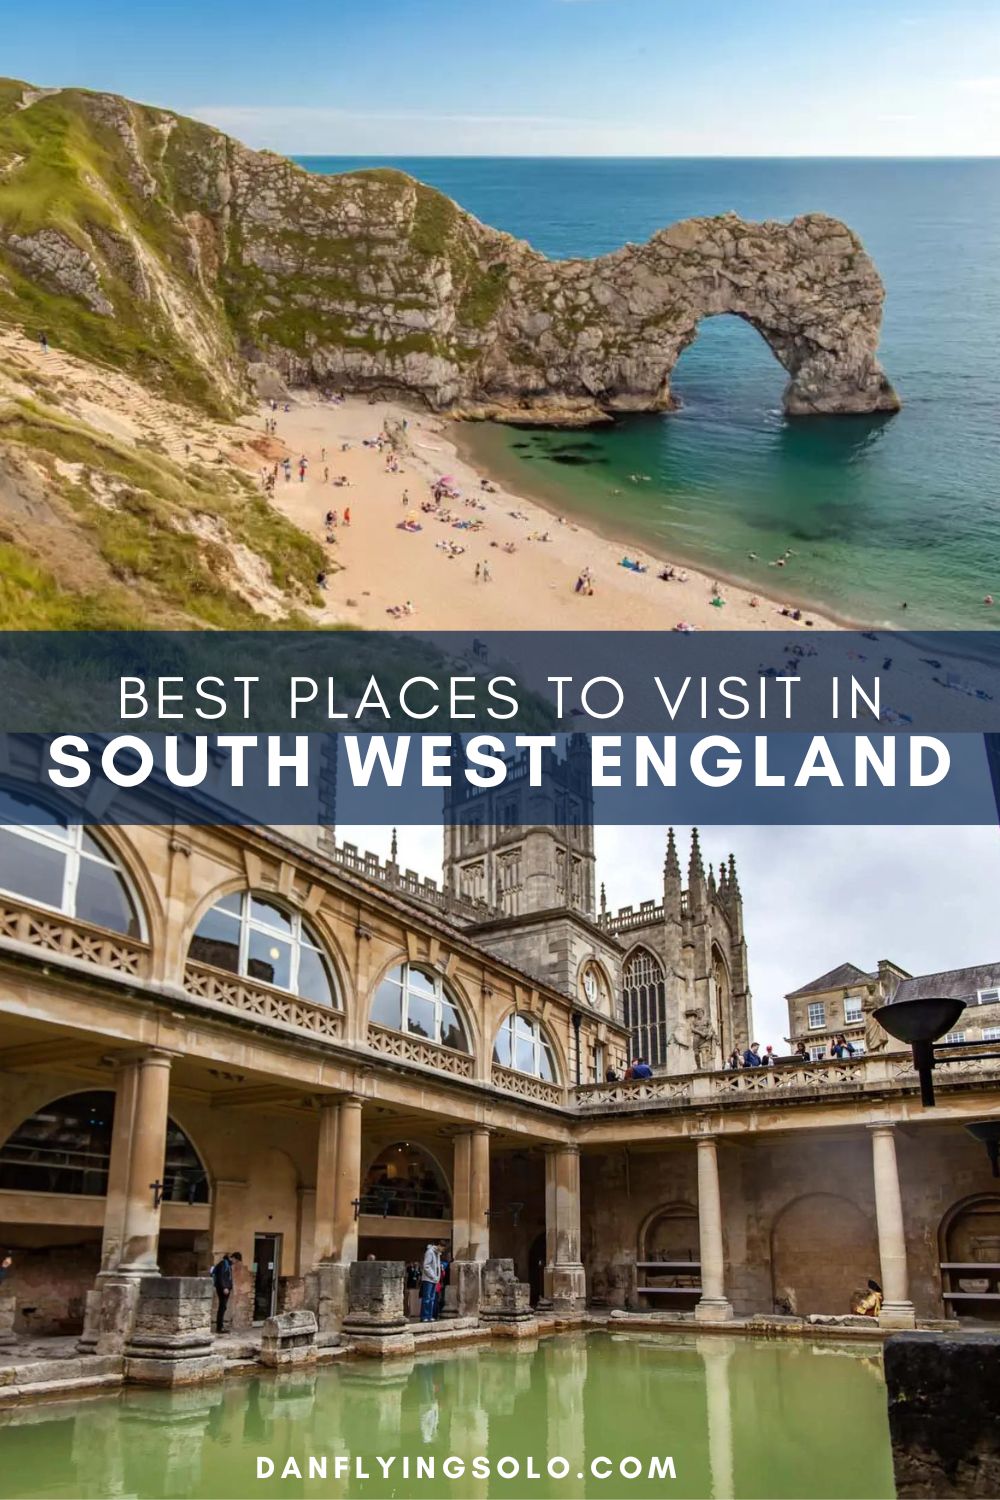 Discover some of the best places to visit in South West England, including unusual spots and special stays for a unique getaway.